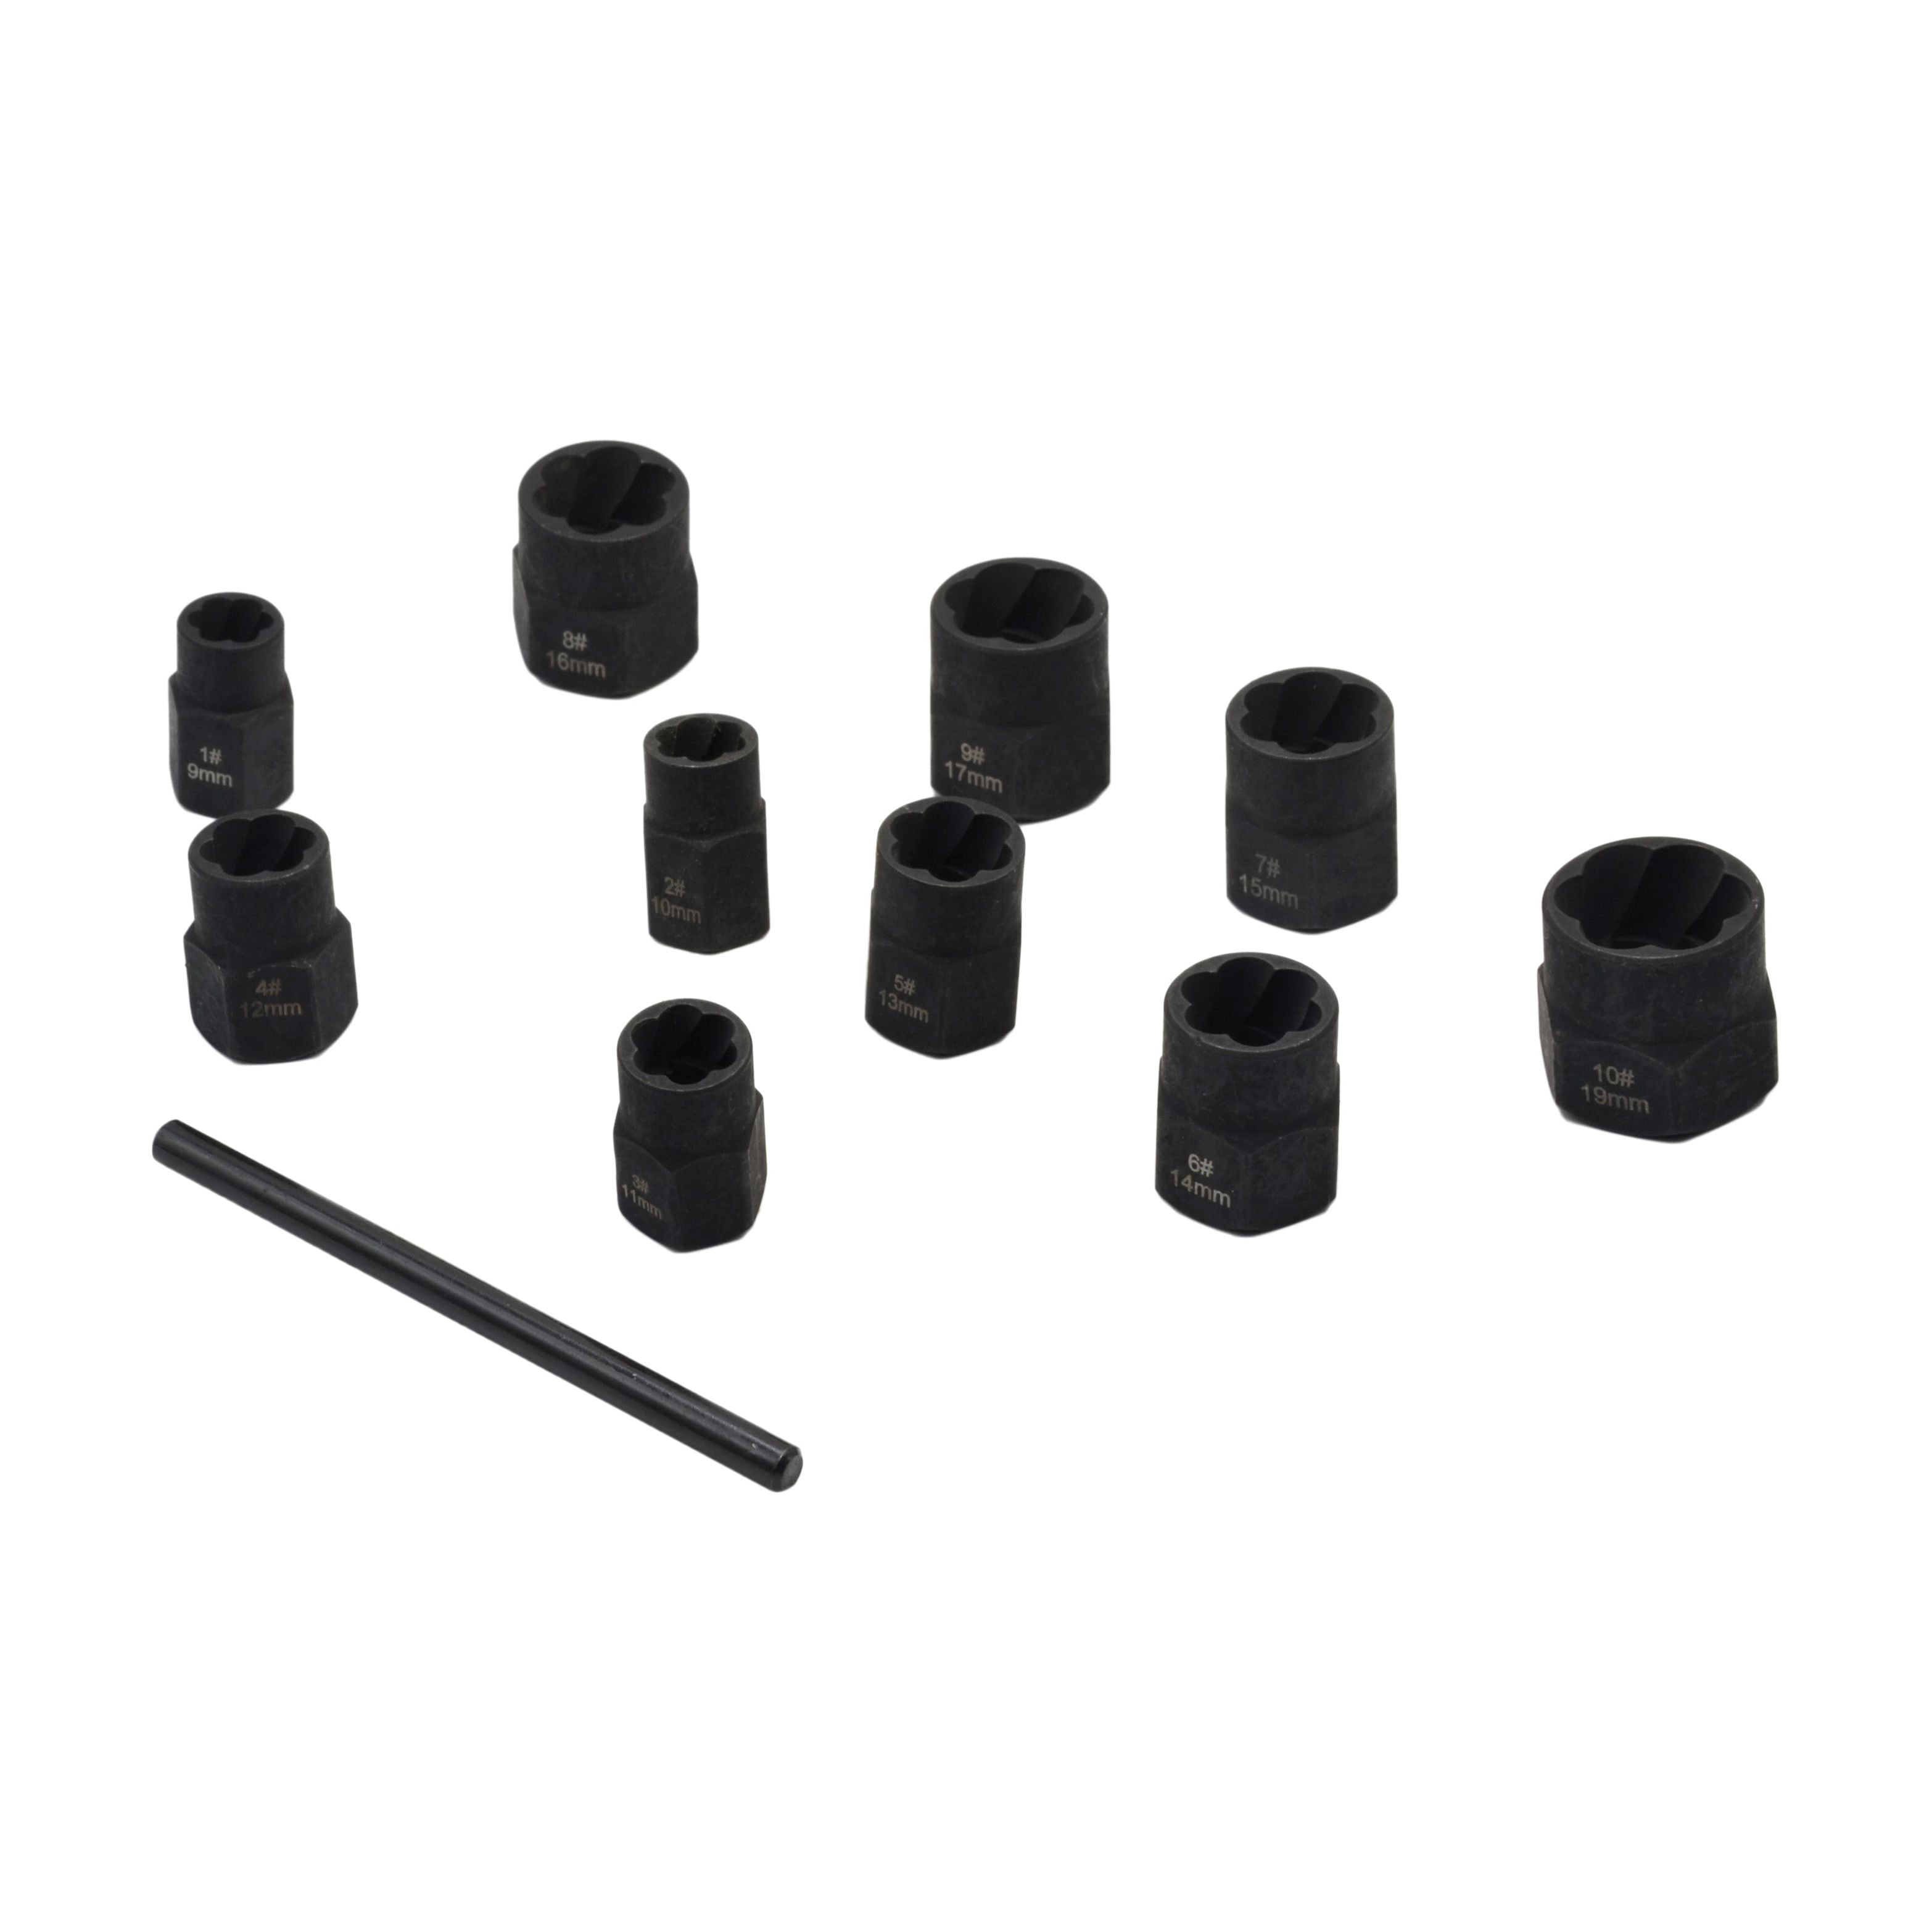 10 piece 3/8" Drive Damaged Bolt and Nut Extractor Set